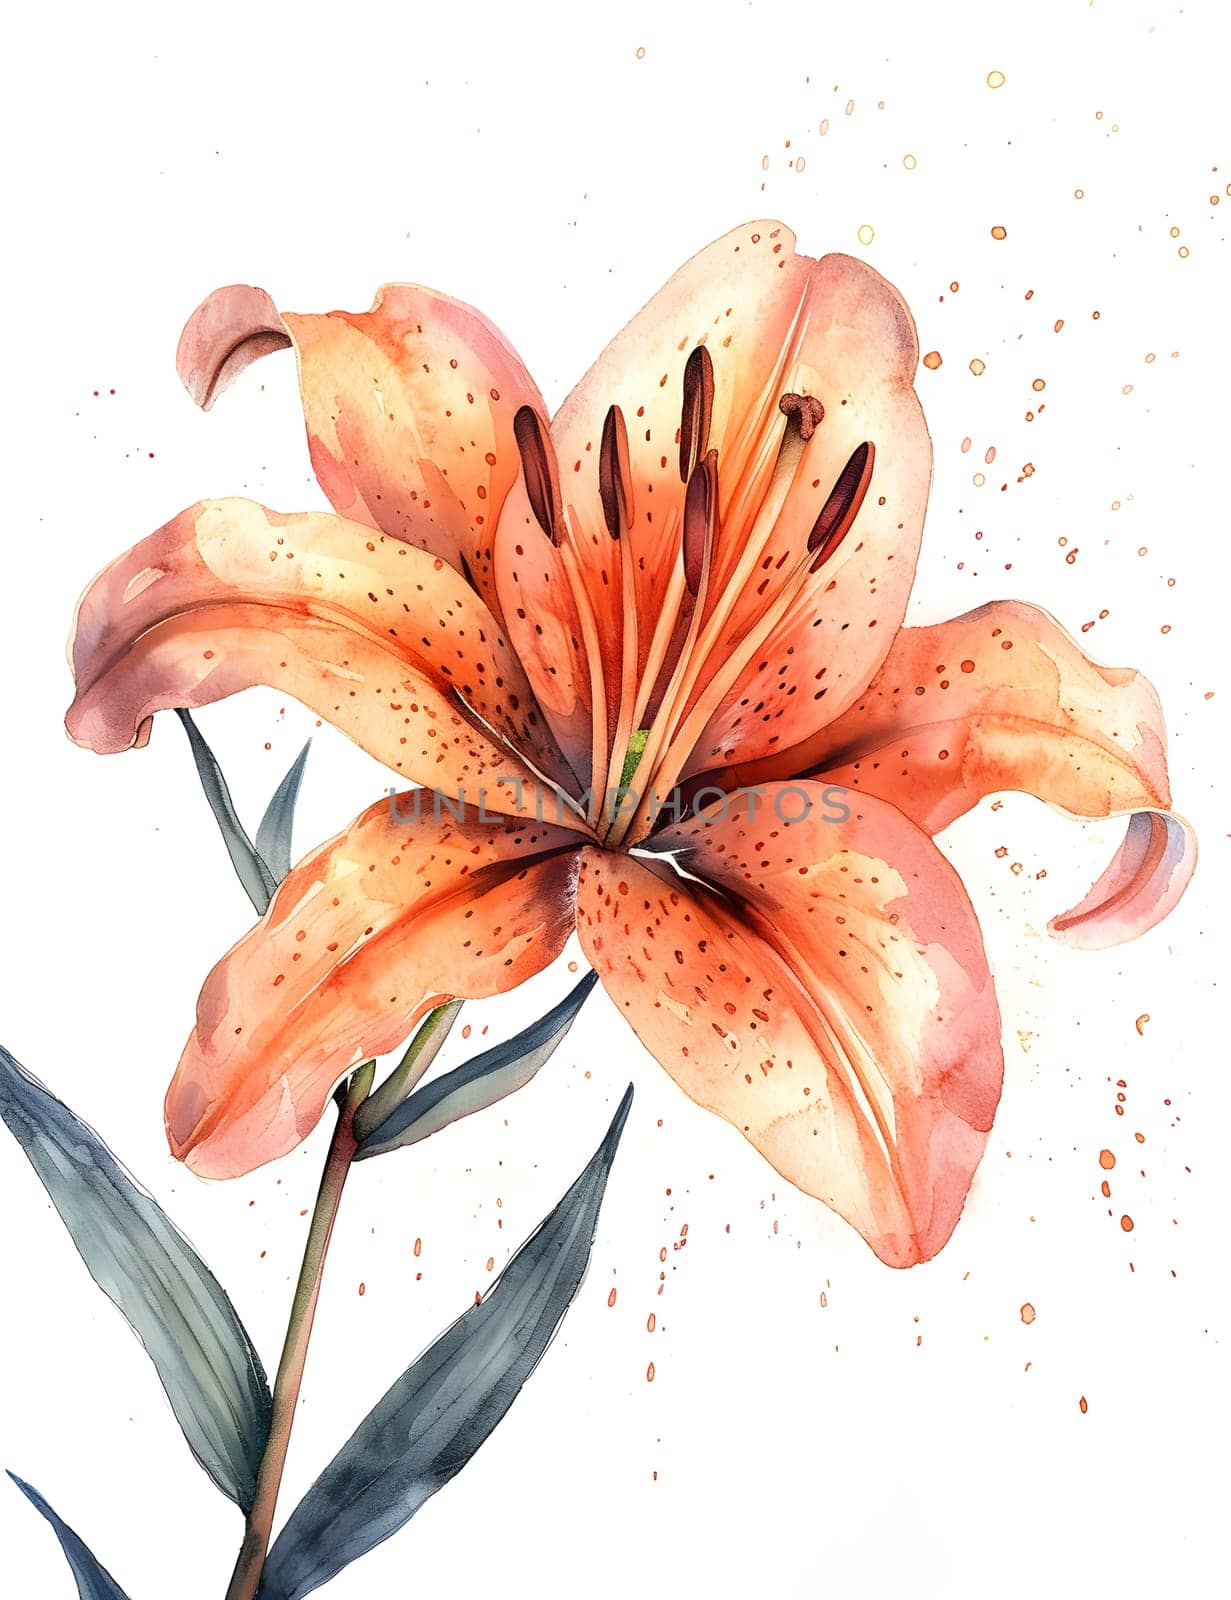 A painting of a terrestrial plant, an orange lily with green leaves on a white background, capturing the beauty of nature through art and watercolor paint